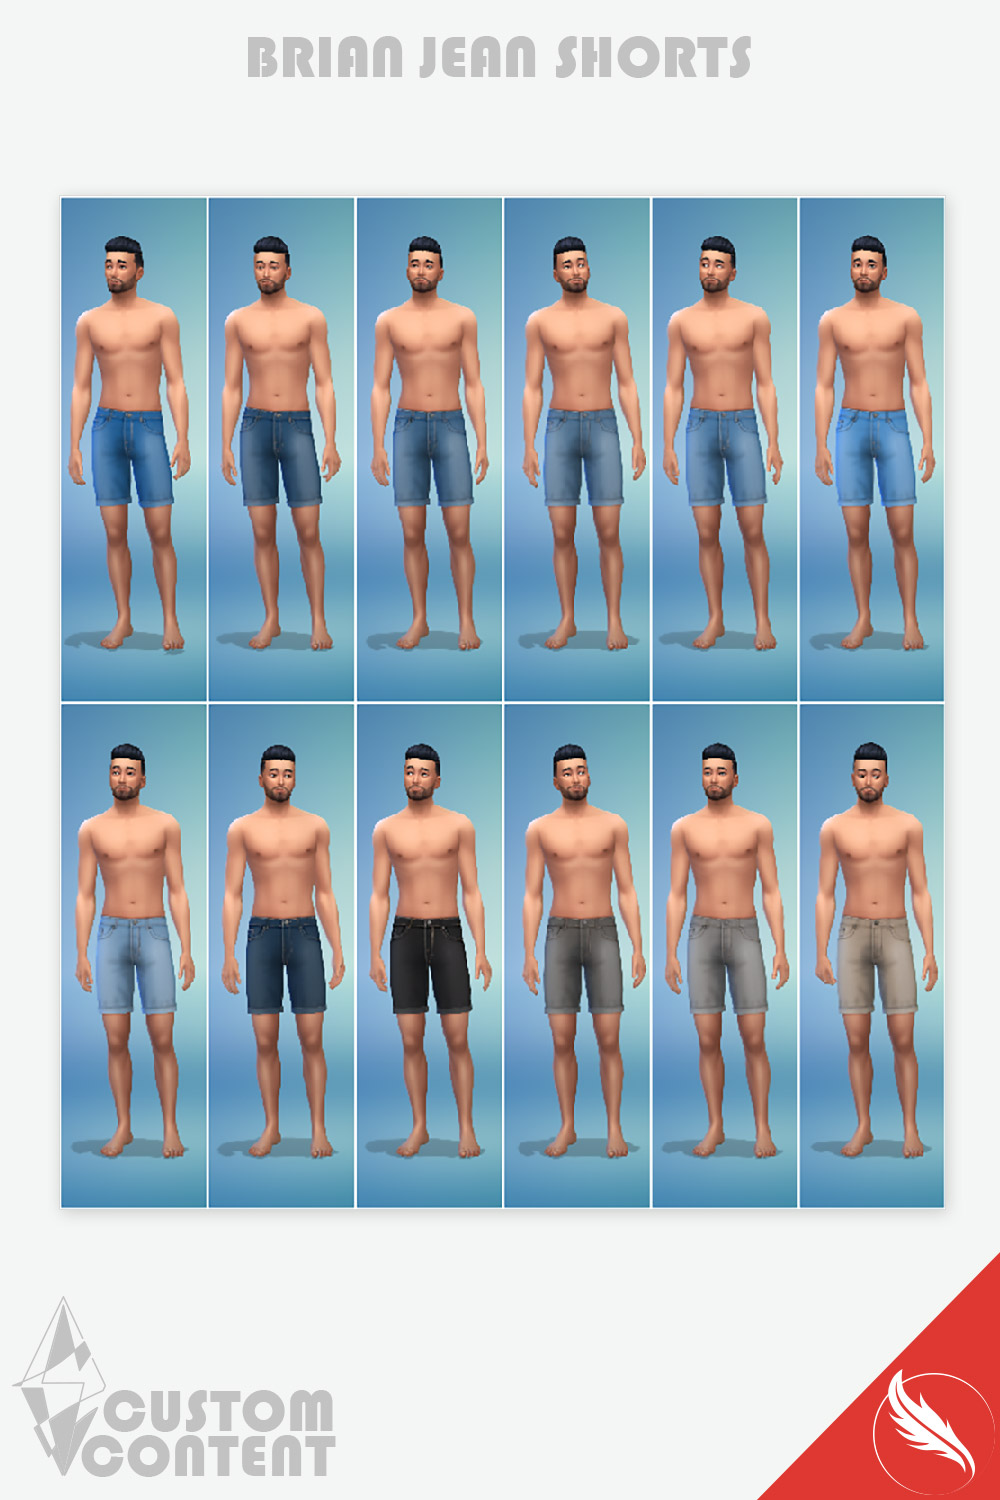 The Sims 4 CC Male Shorts